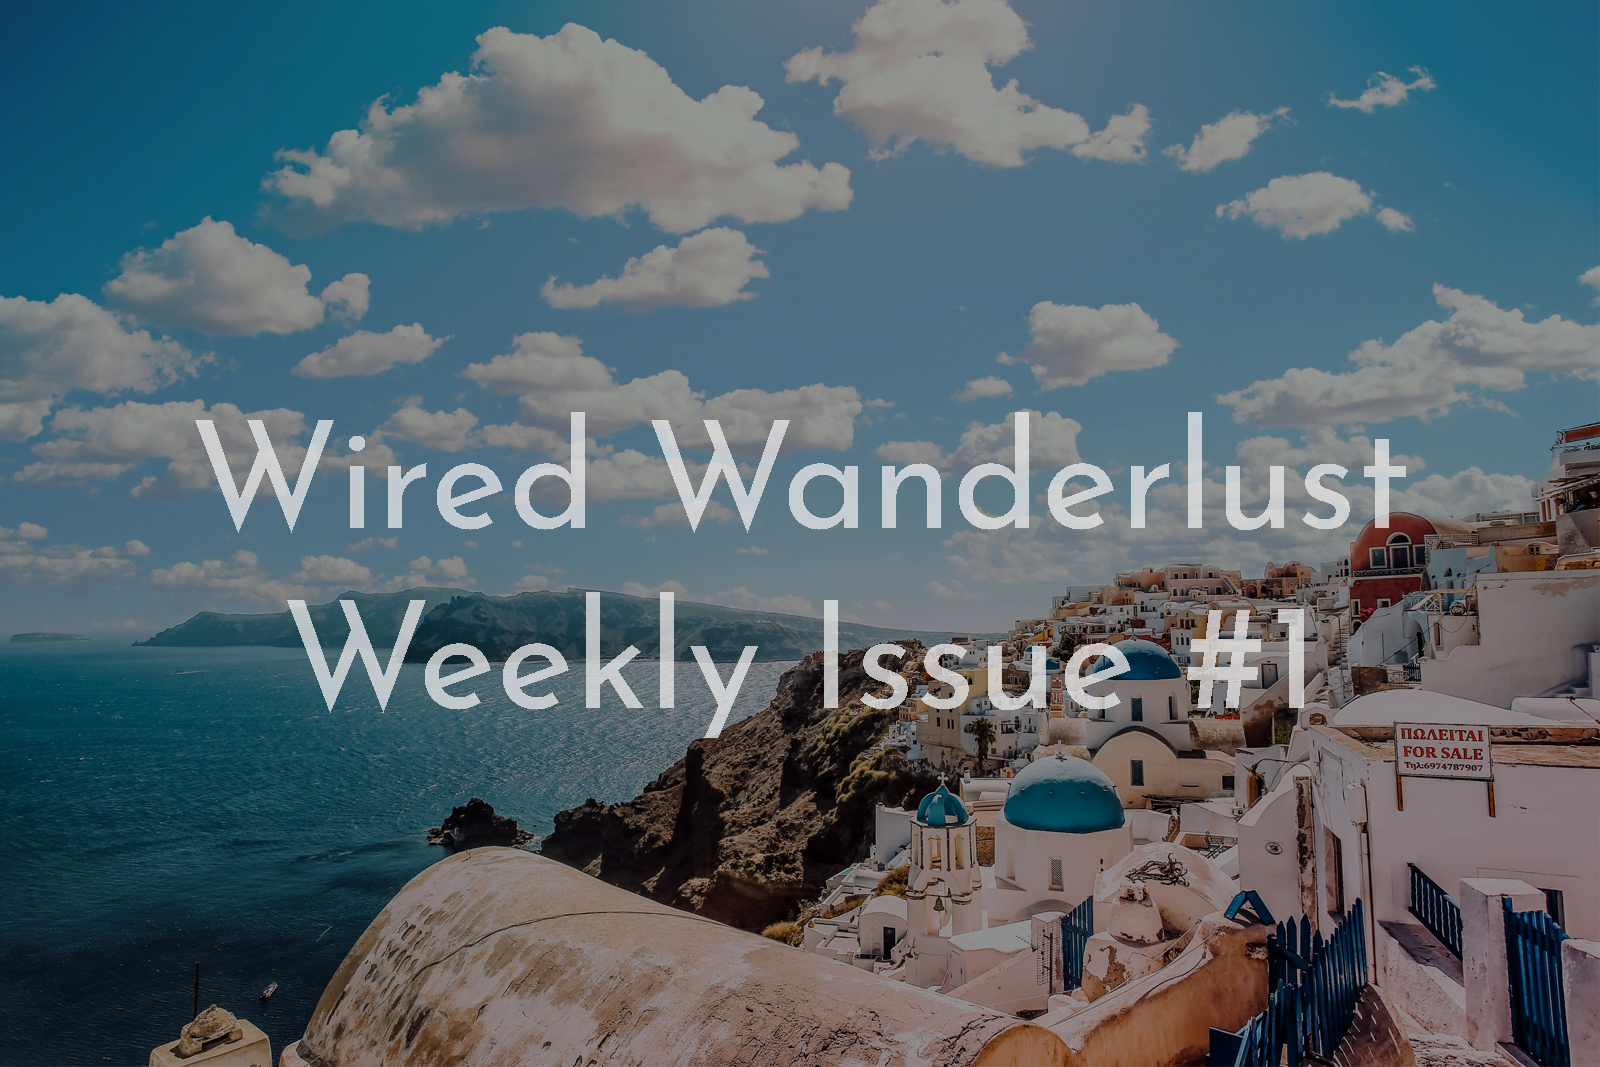 Wired Wanderlust Weekly Issue #1: China Airlines SEA to TPE, Bilt adds Alaska Airlines, Amex + Point.me, Alaska Access